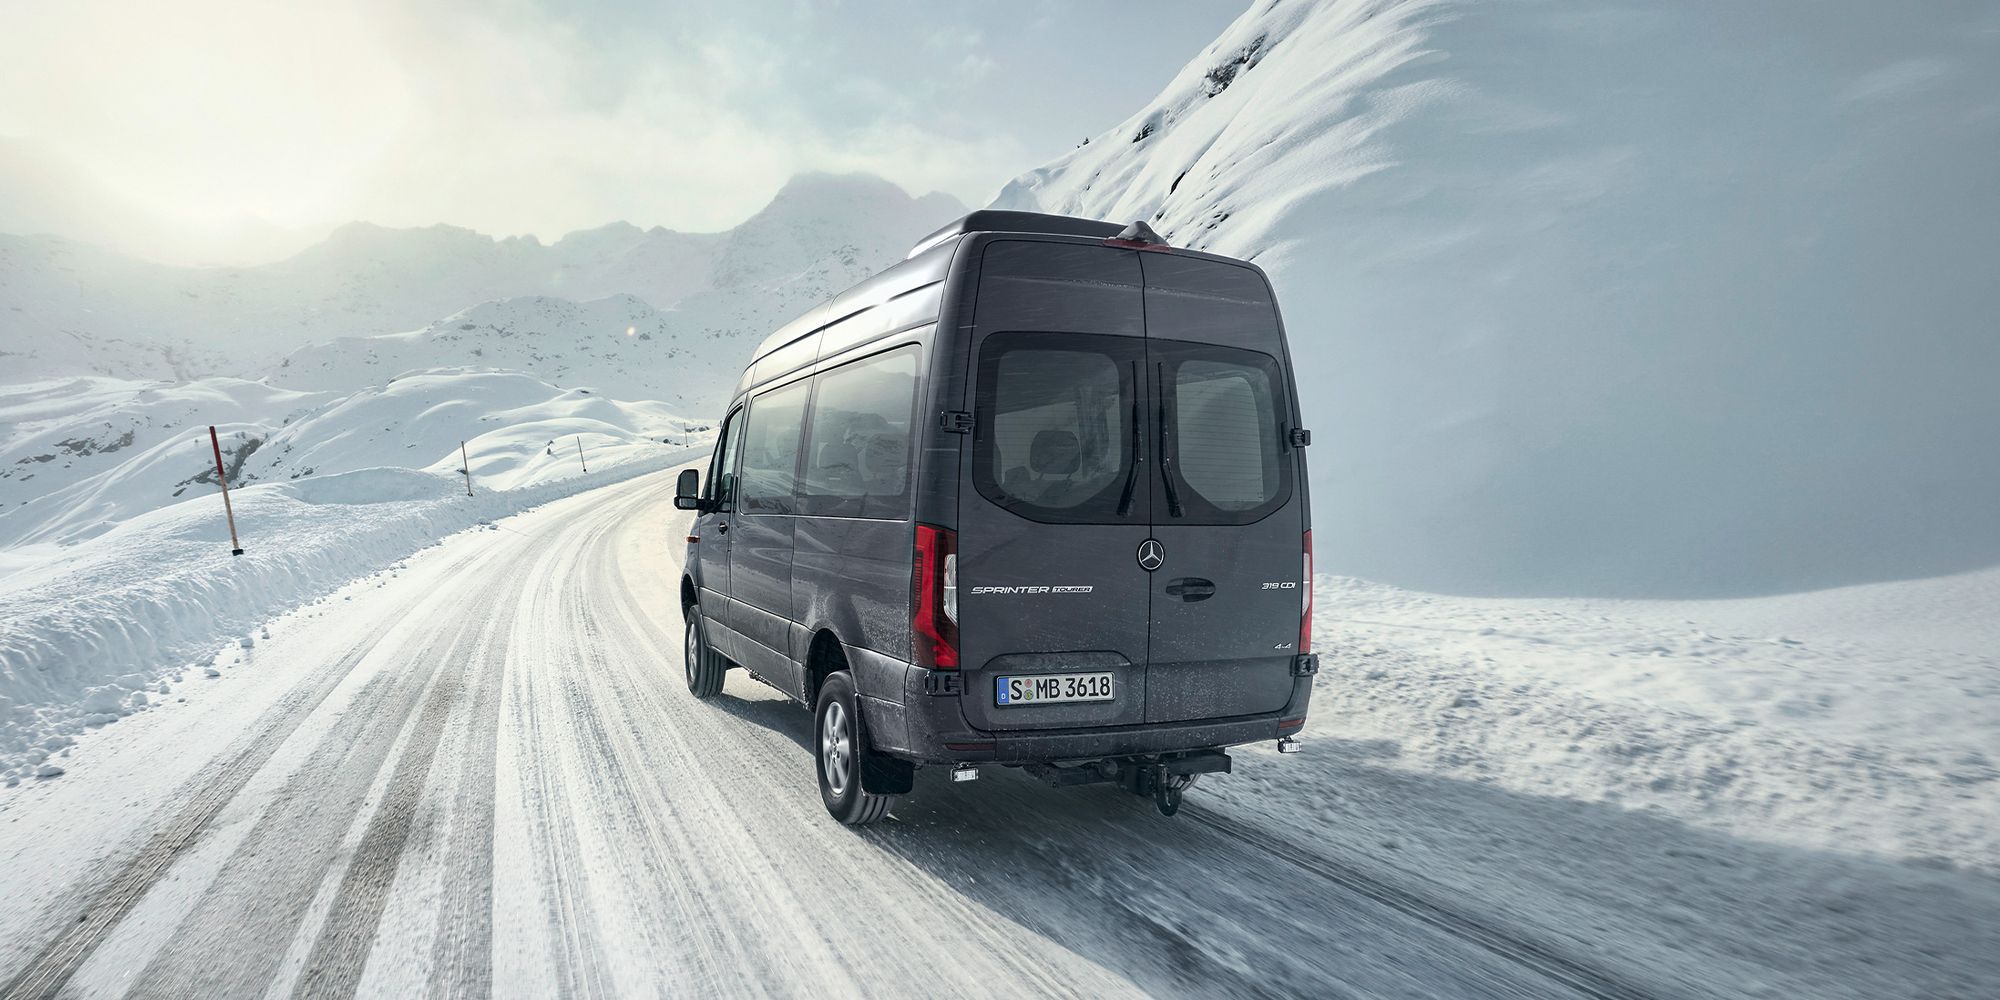 The rear of a Sprinter 4x4 on a snowy road